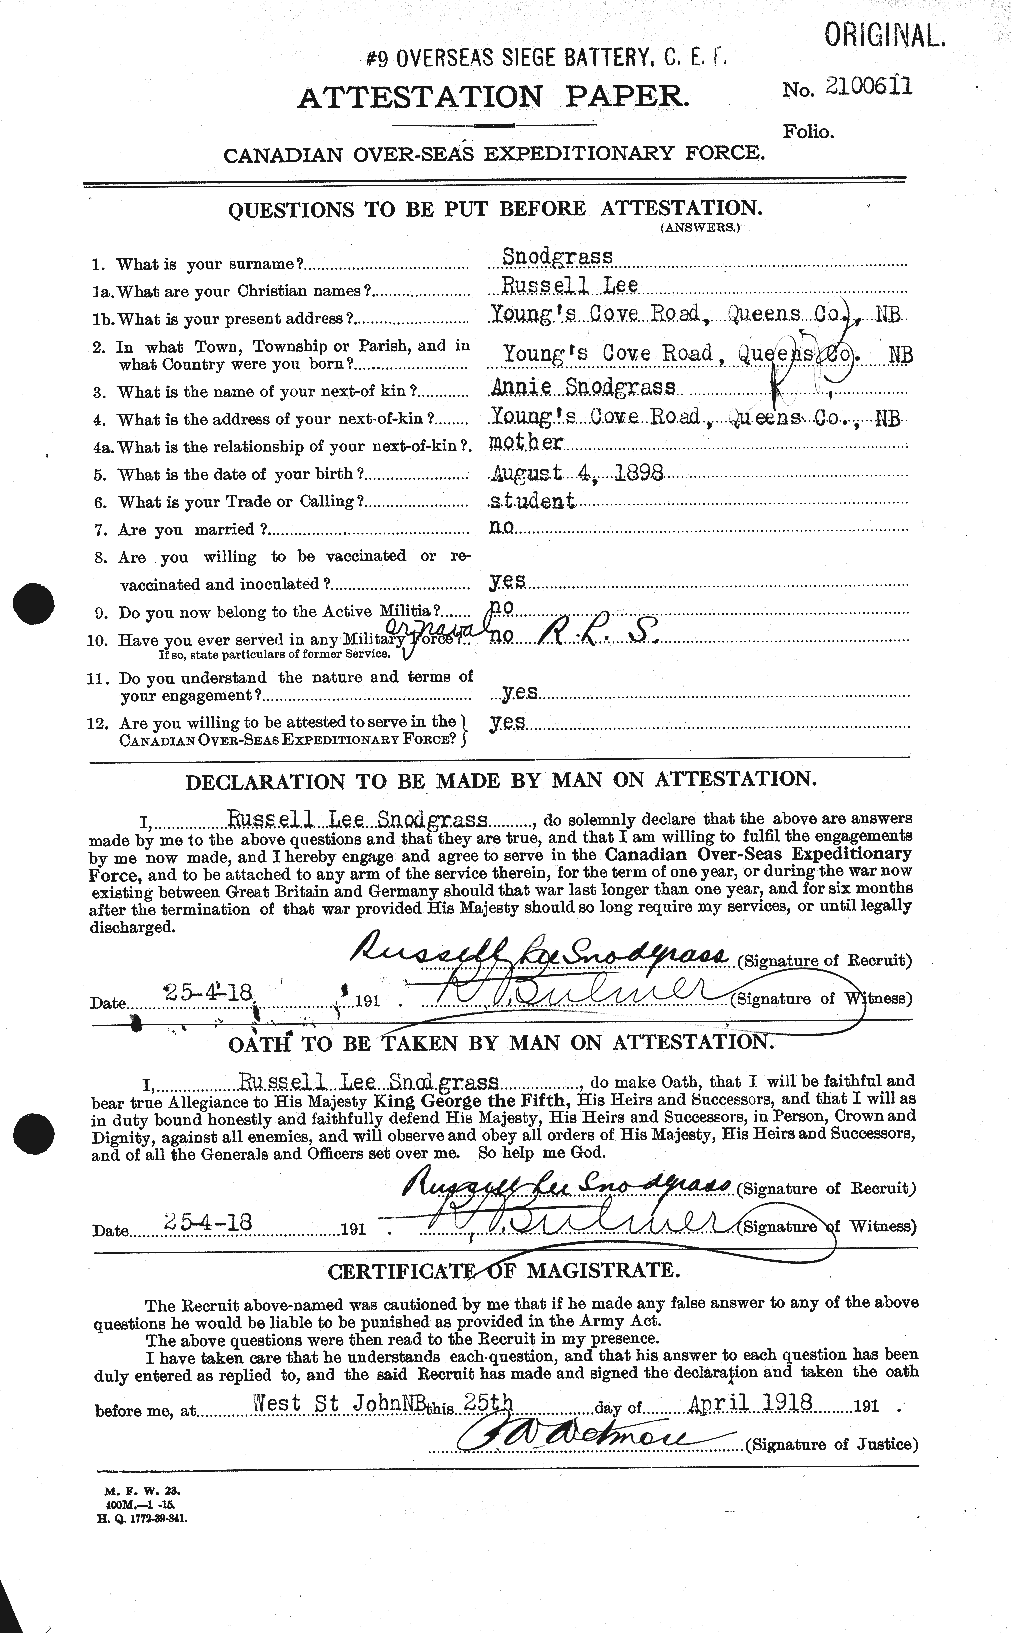 Personnel Records of the First World War - CEF 109430a